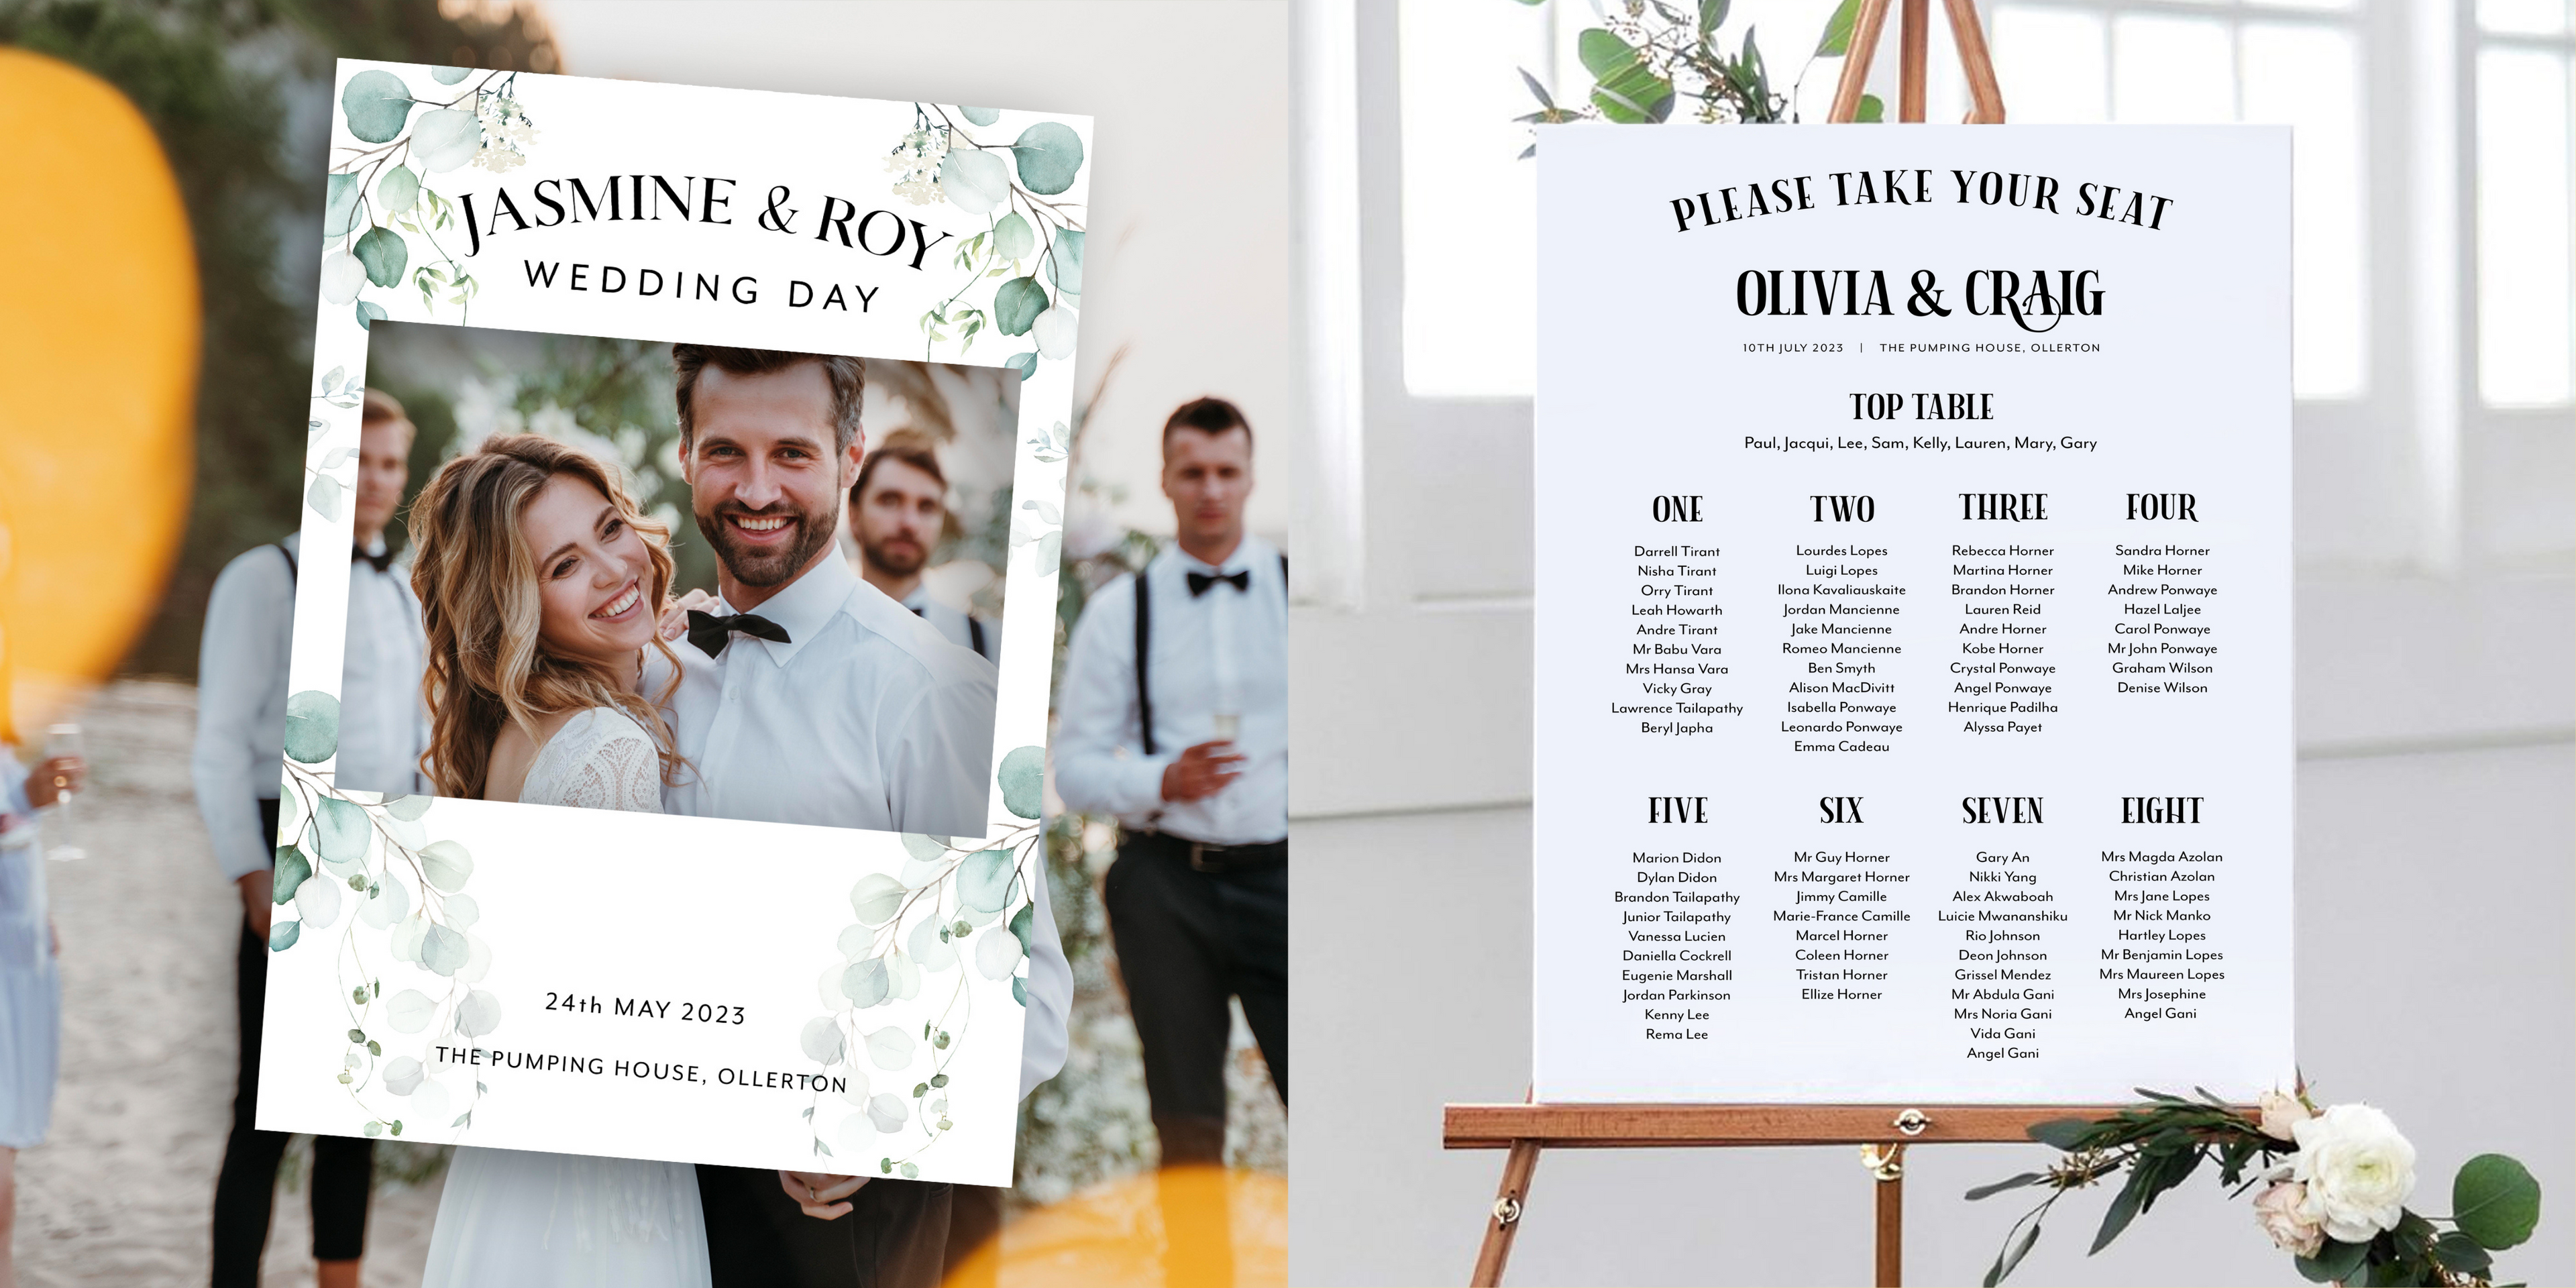 image of a wedding selfie frame and a wedding seating plan